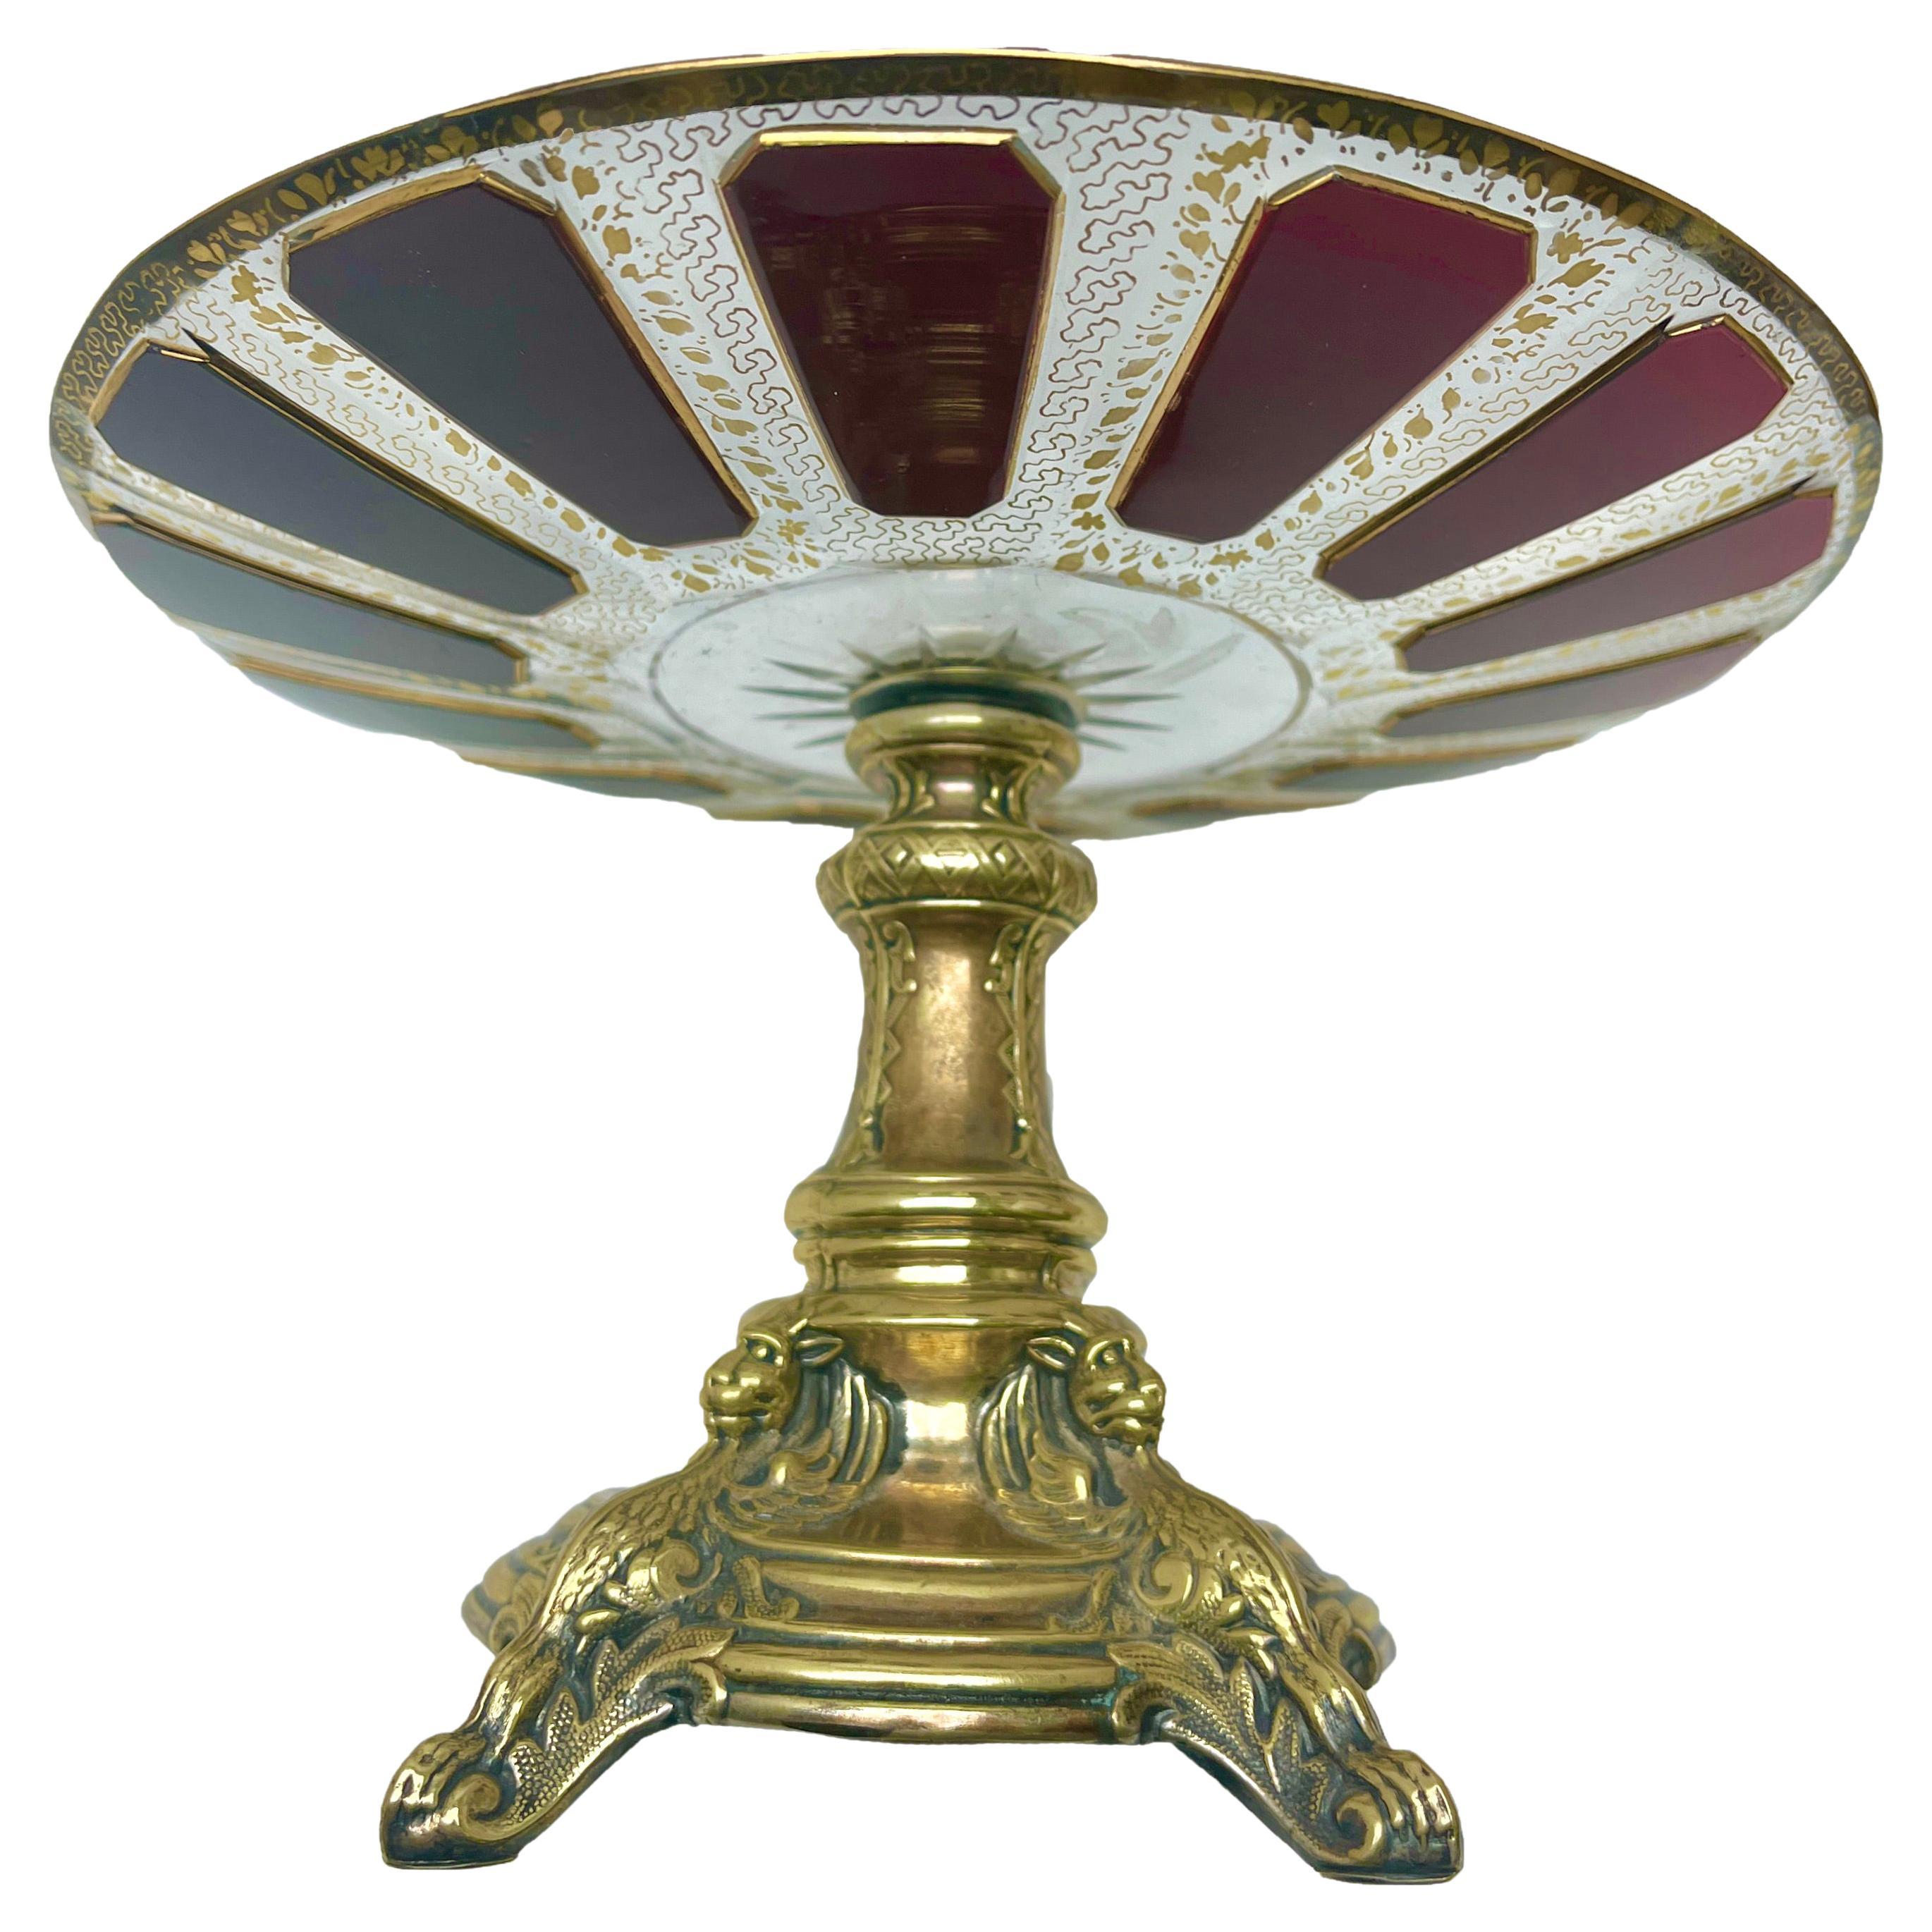 Art Nouveau Centrepiece Attributed to Kayser in Germany, circa 1900 For Sale